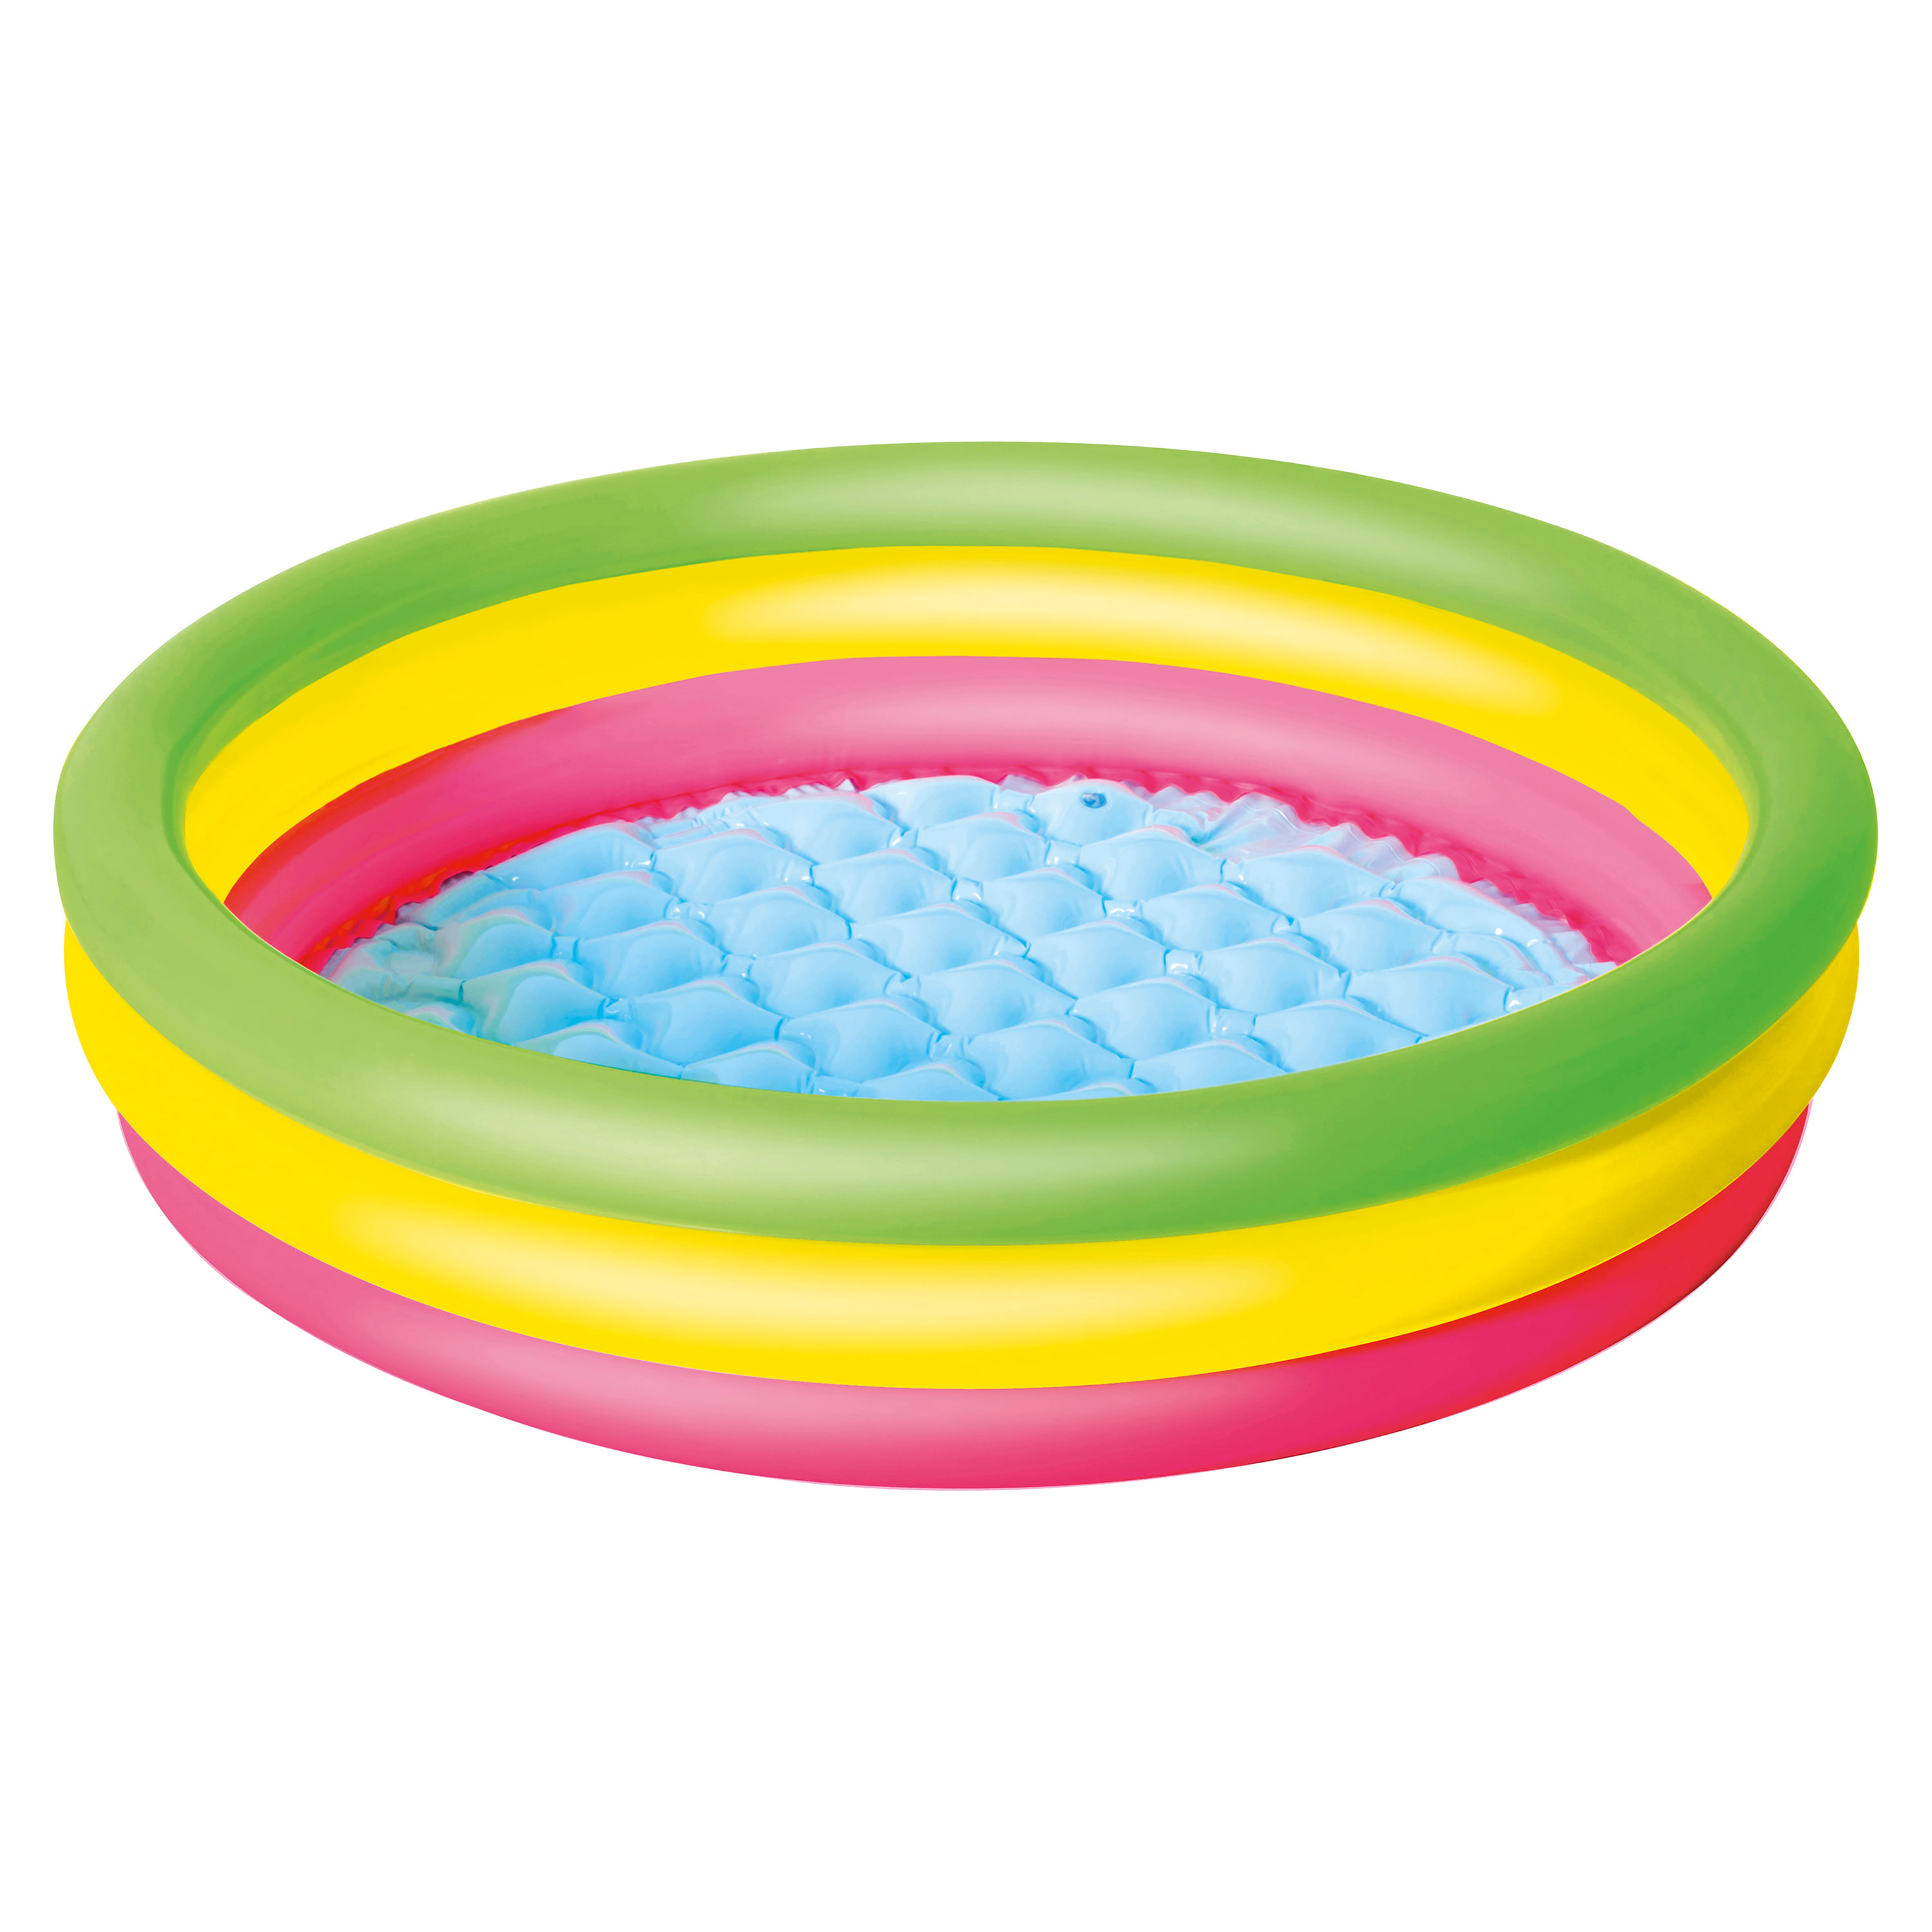 Play-Day-Piscina-Inf-16G-3-Colores-1-12003